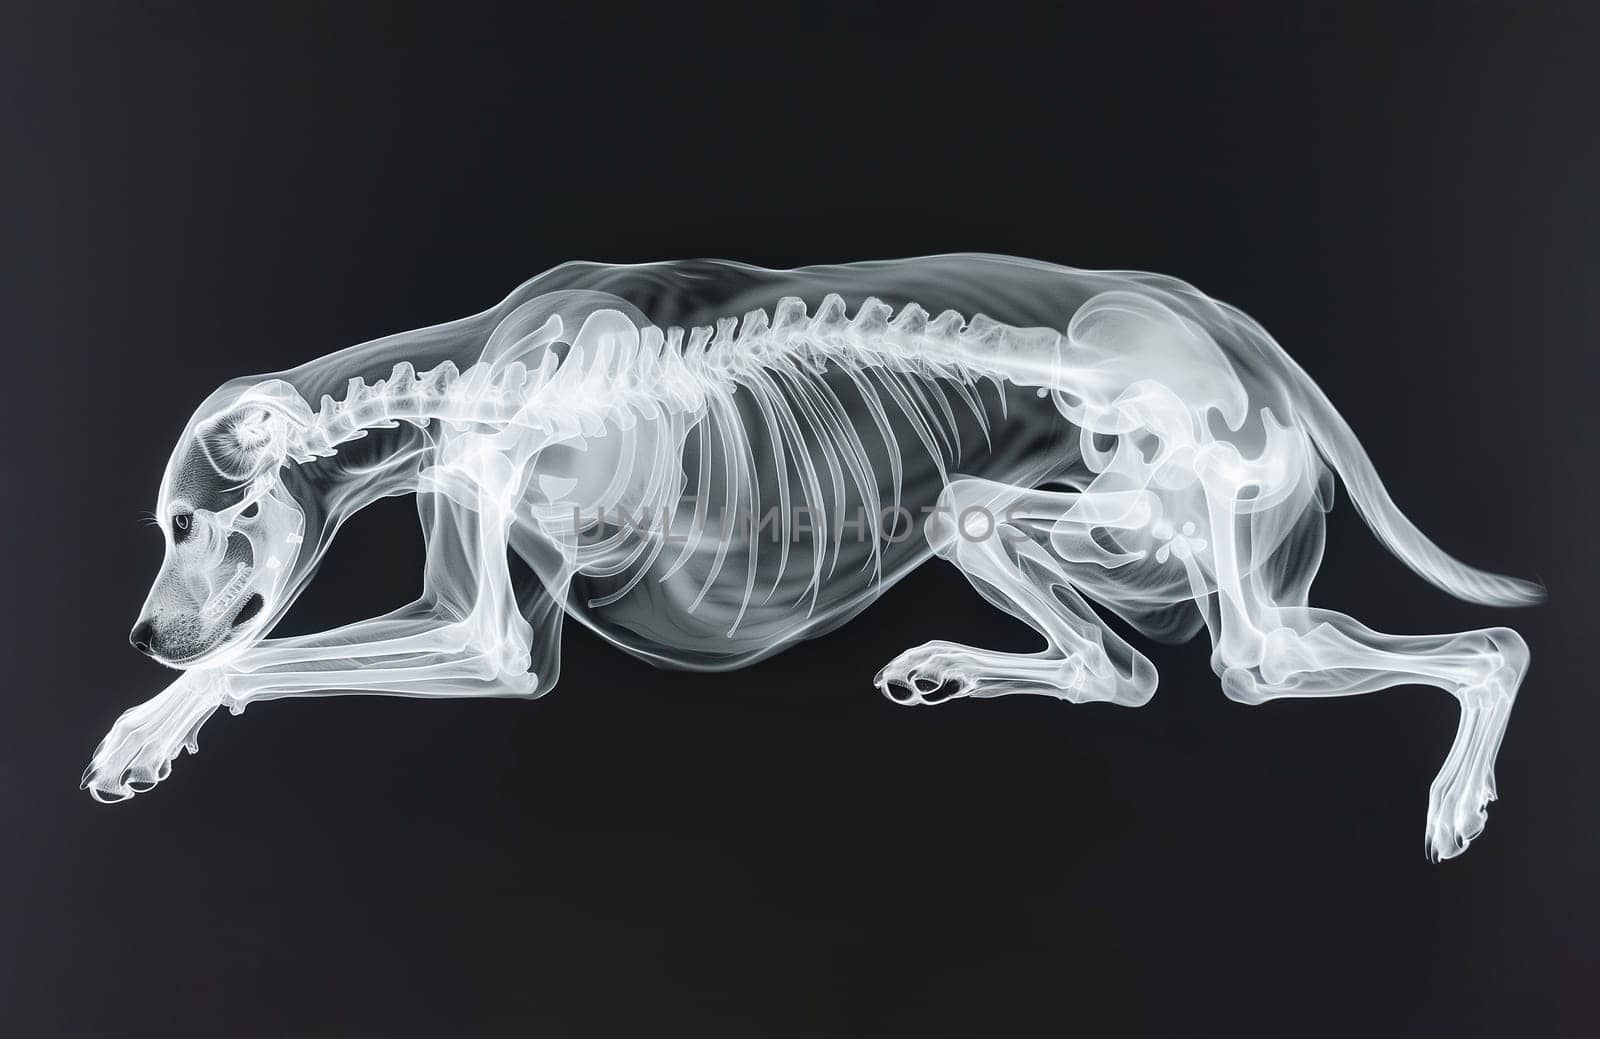 Radiographs, X Ray Picture With Dog's Skeleton for Treatment and Diagnosis. Animal Hospitals, Vet. Pet Scan. AI Generated Puppy Positron Emission Tomography Mockup. Horizontal Plane. by netatsi